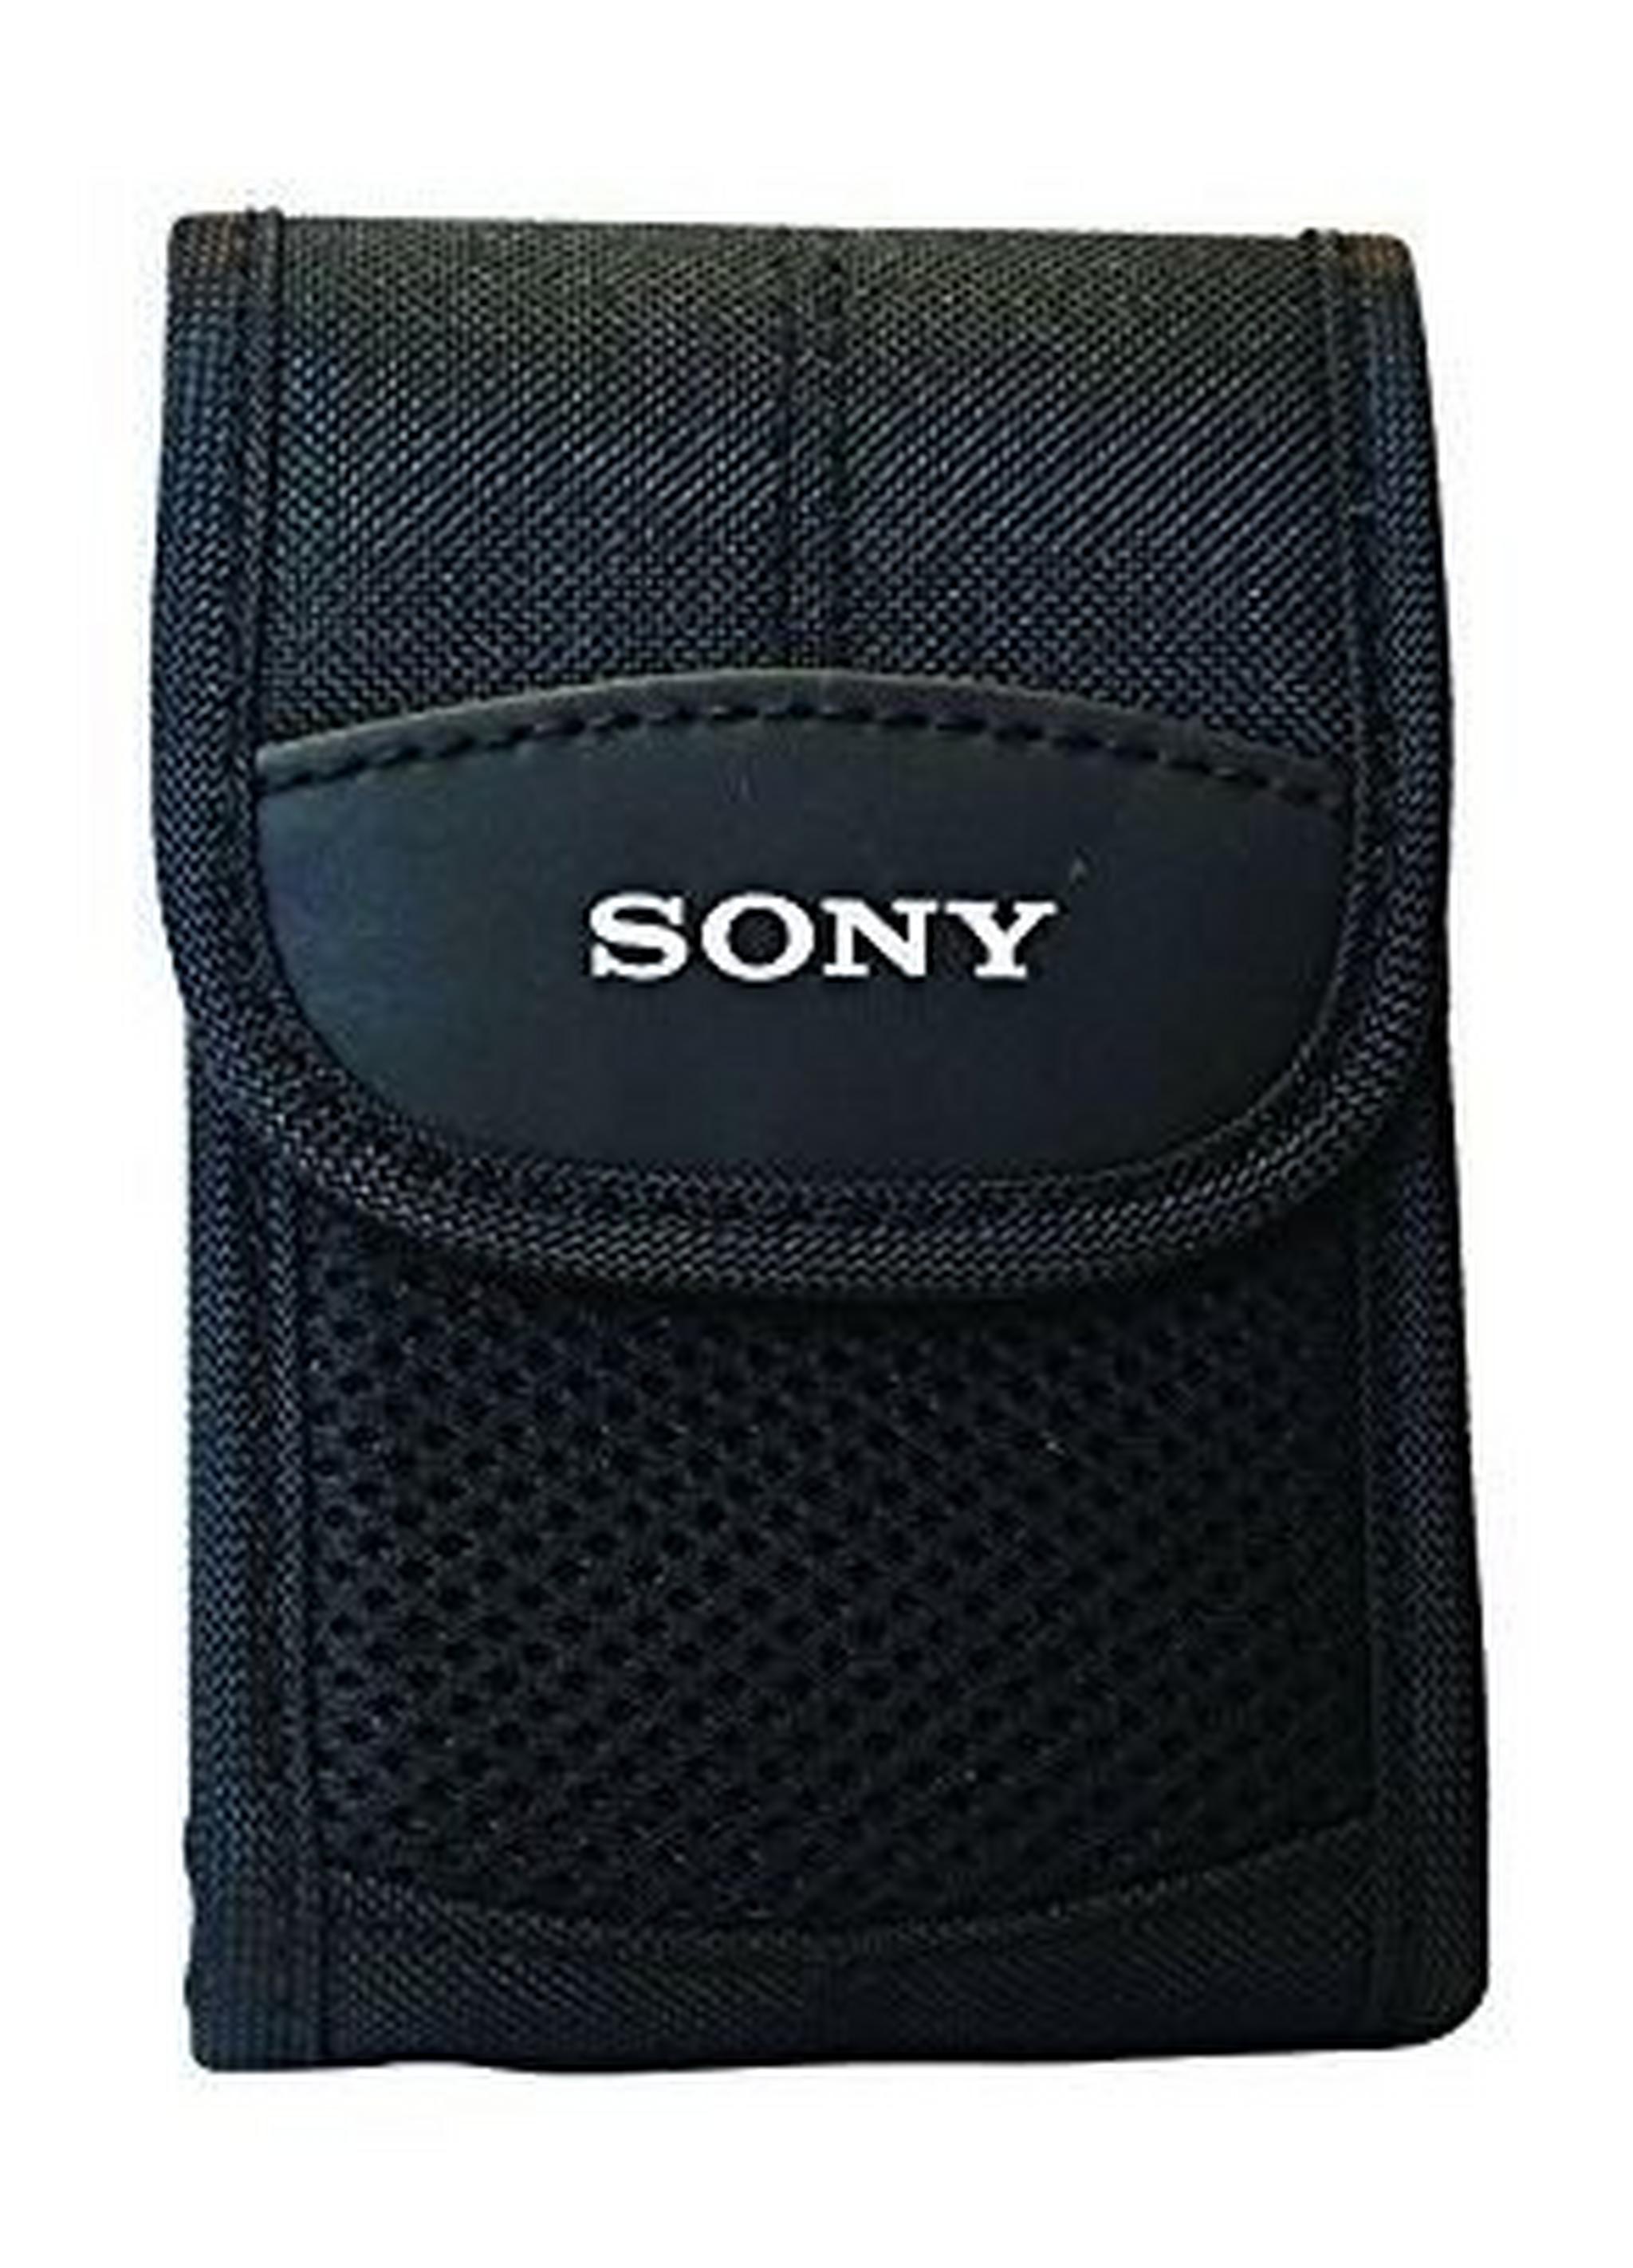 Sony Soft Carrying Camera Case (LCS-BDE) - Black